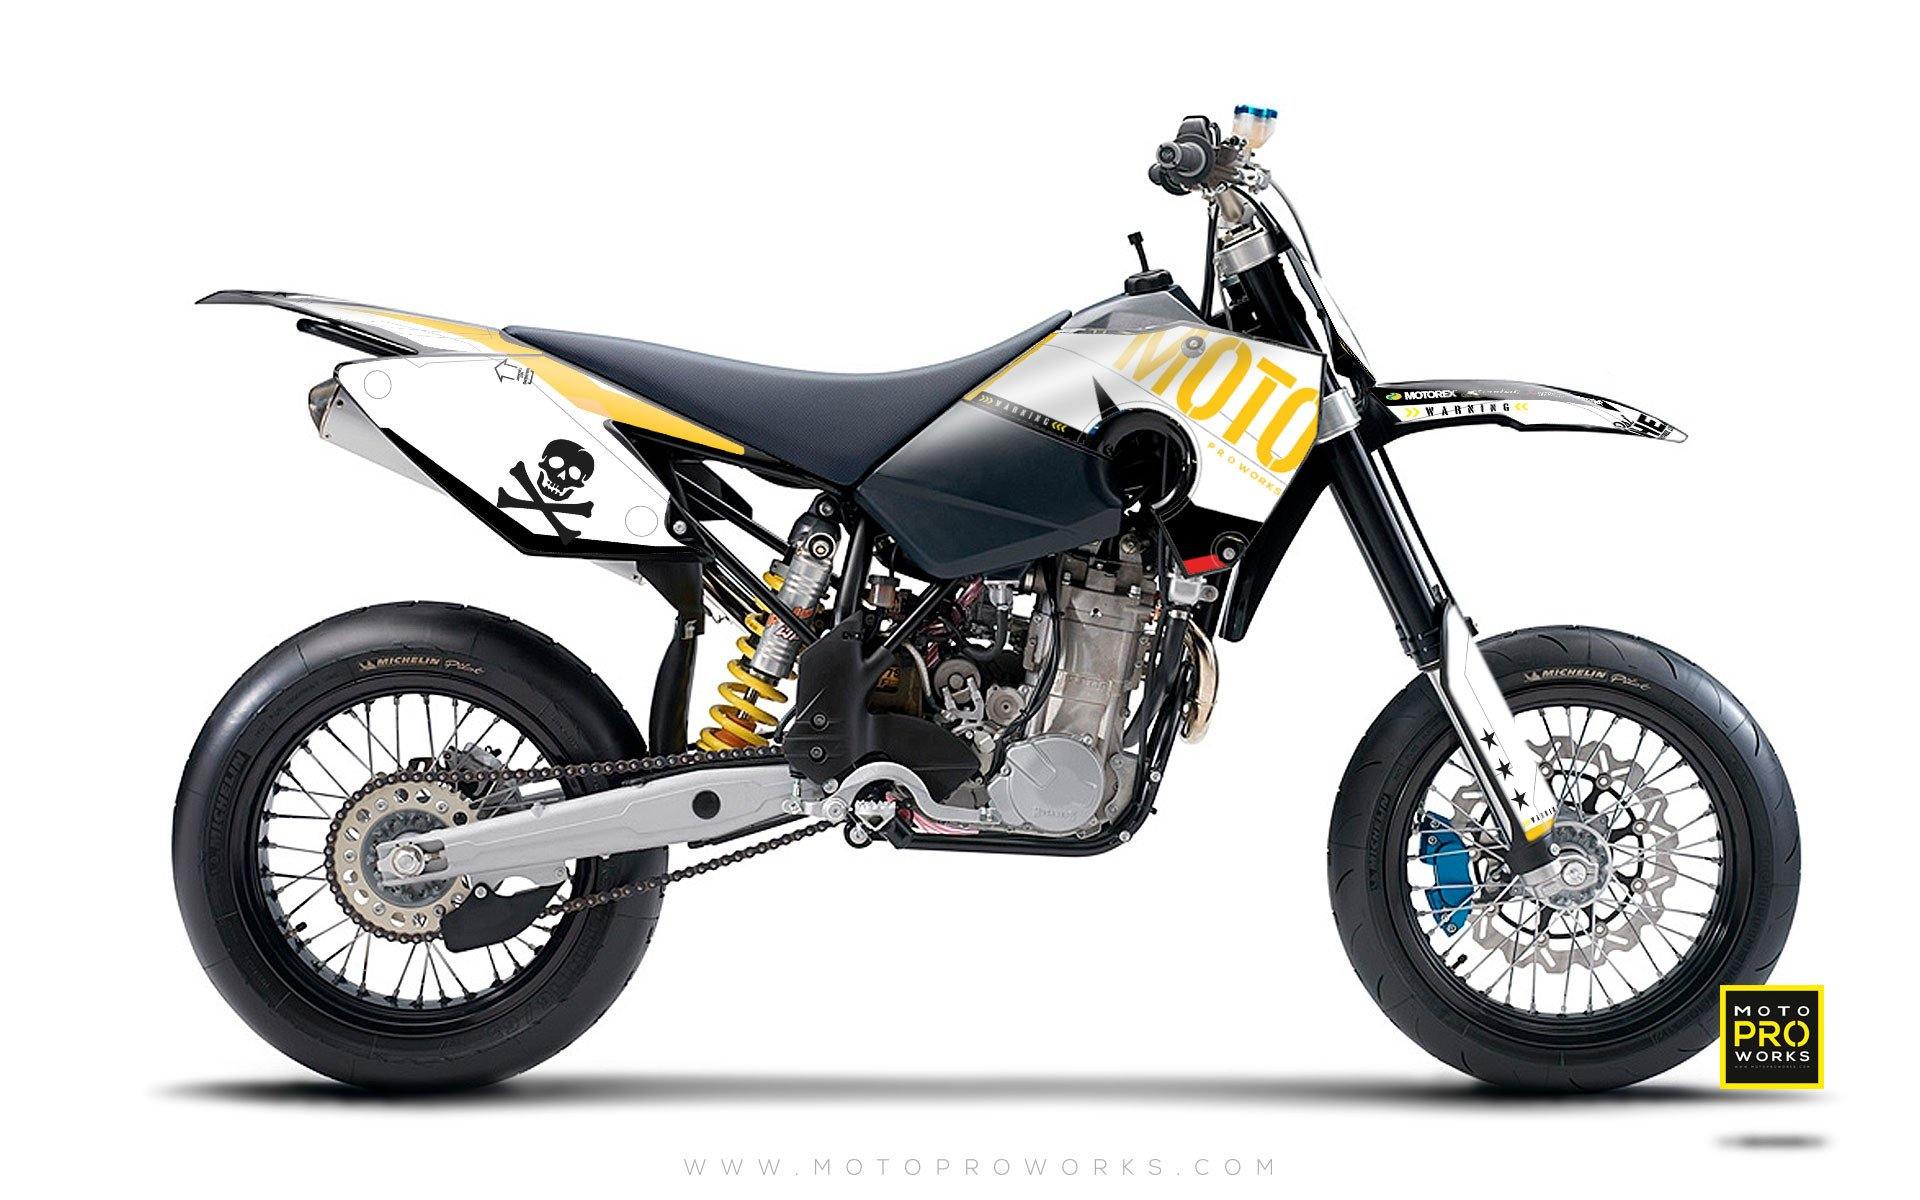 Husaberg GRAPHIC KIT - "GTECH" (white) - MotoProWorks | Decals and Bike Graphic kit